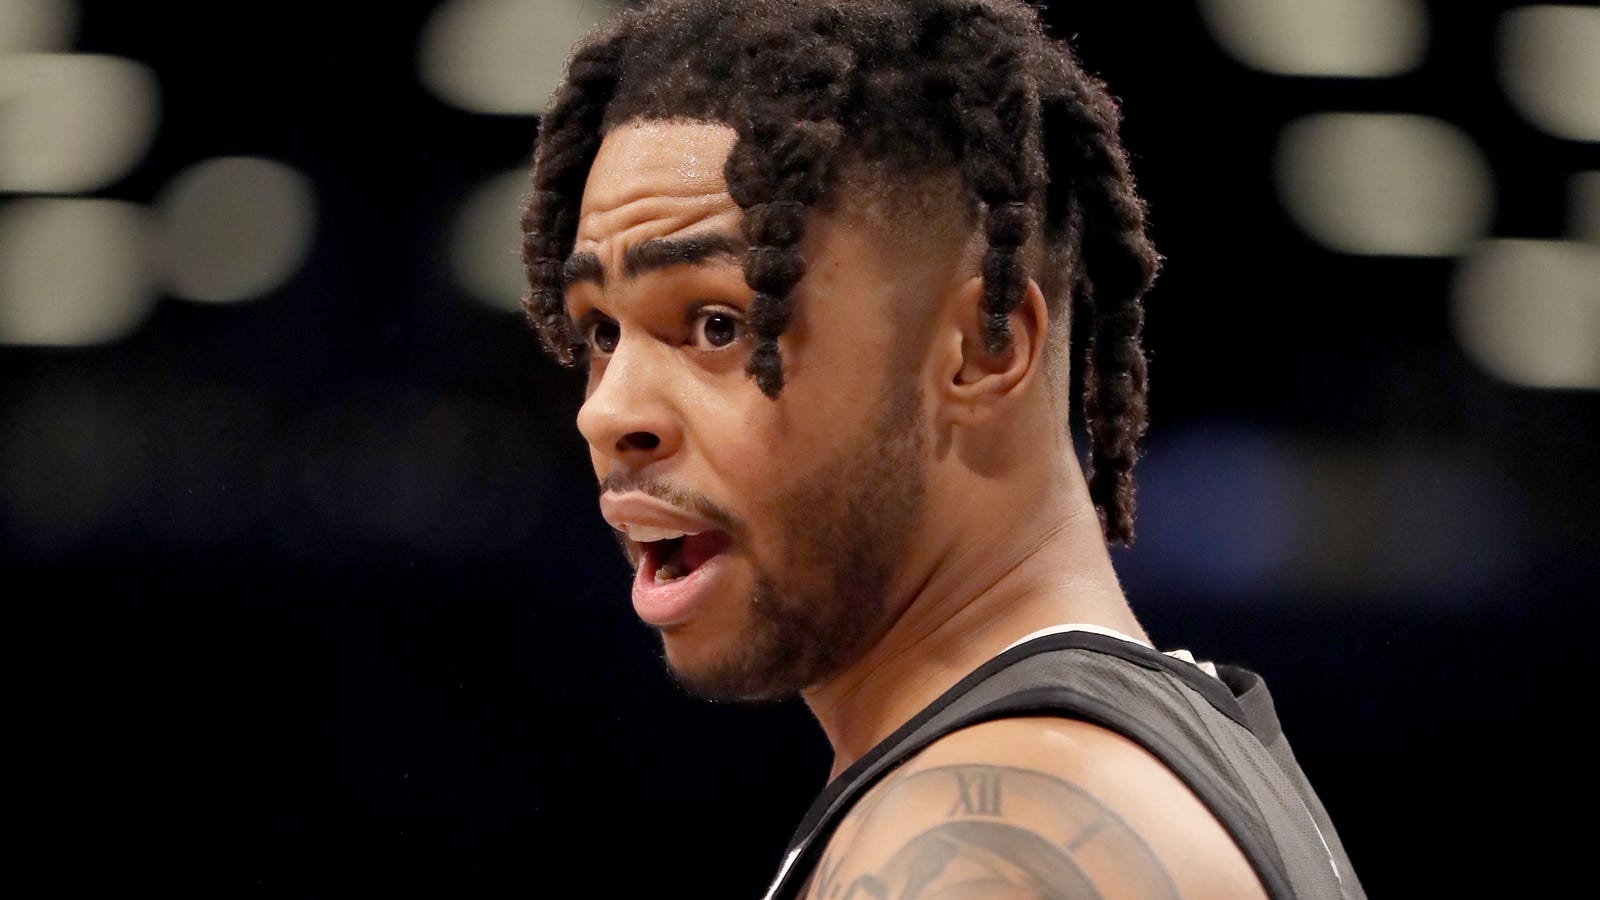 Brooklyn Nets Guard D'Angelo Russell's Weed Arrest is the Least of His Troubles